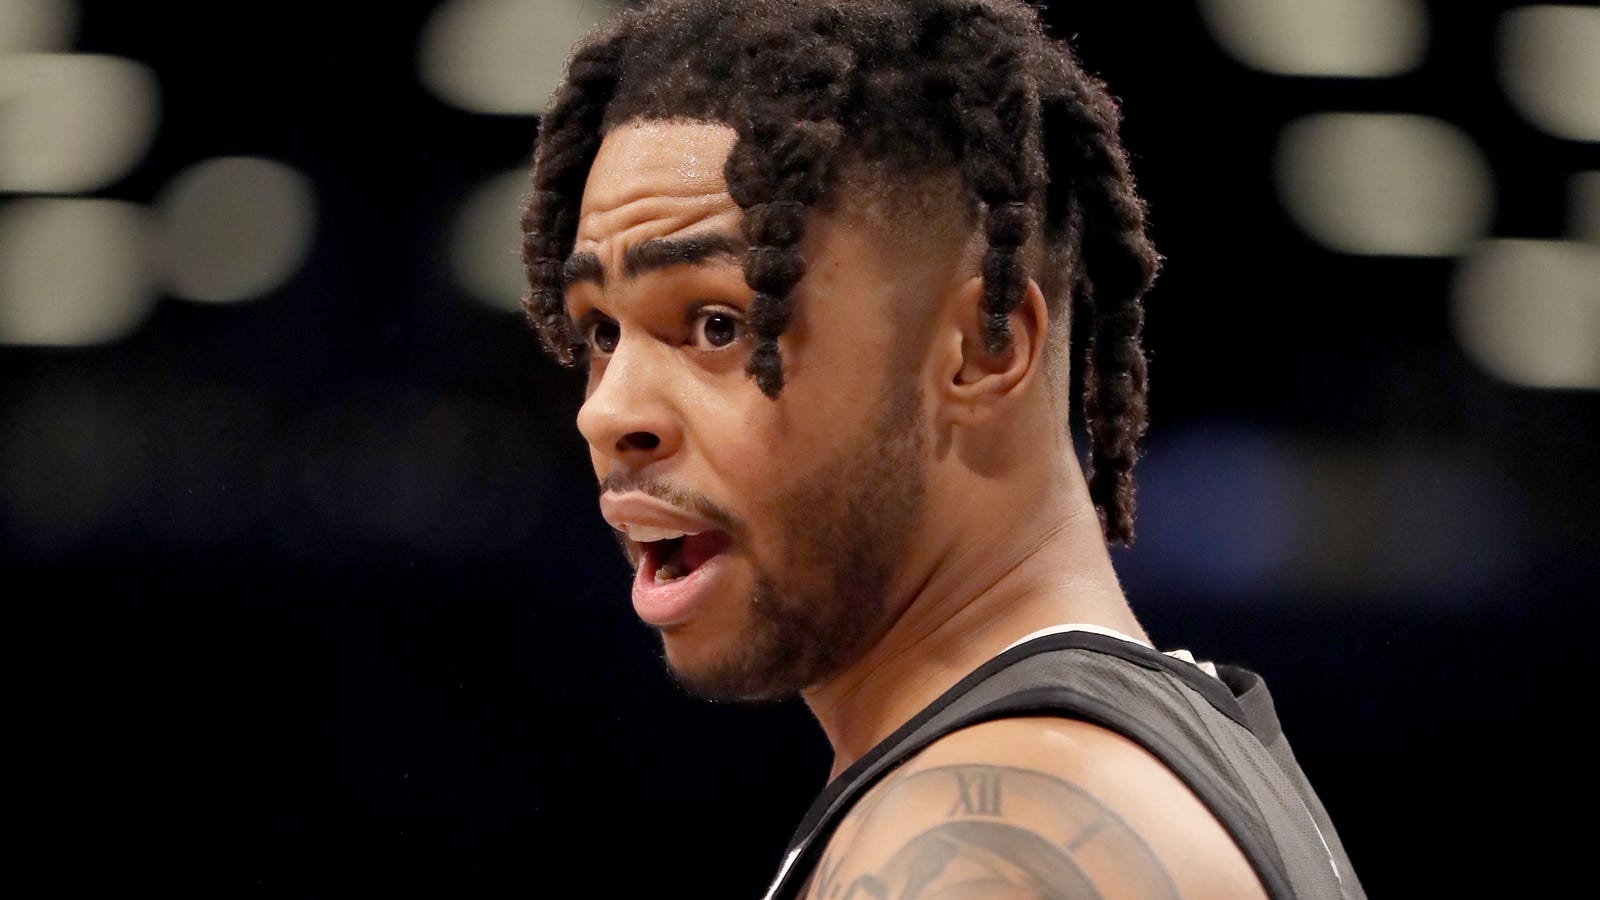 Brooklyn Nets Guard D'Angelo Russell's Weed Arrest is the Least of His Troubles